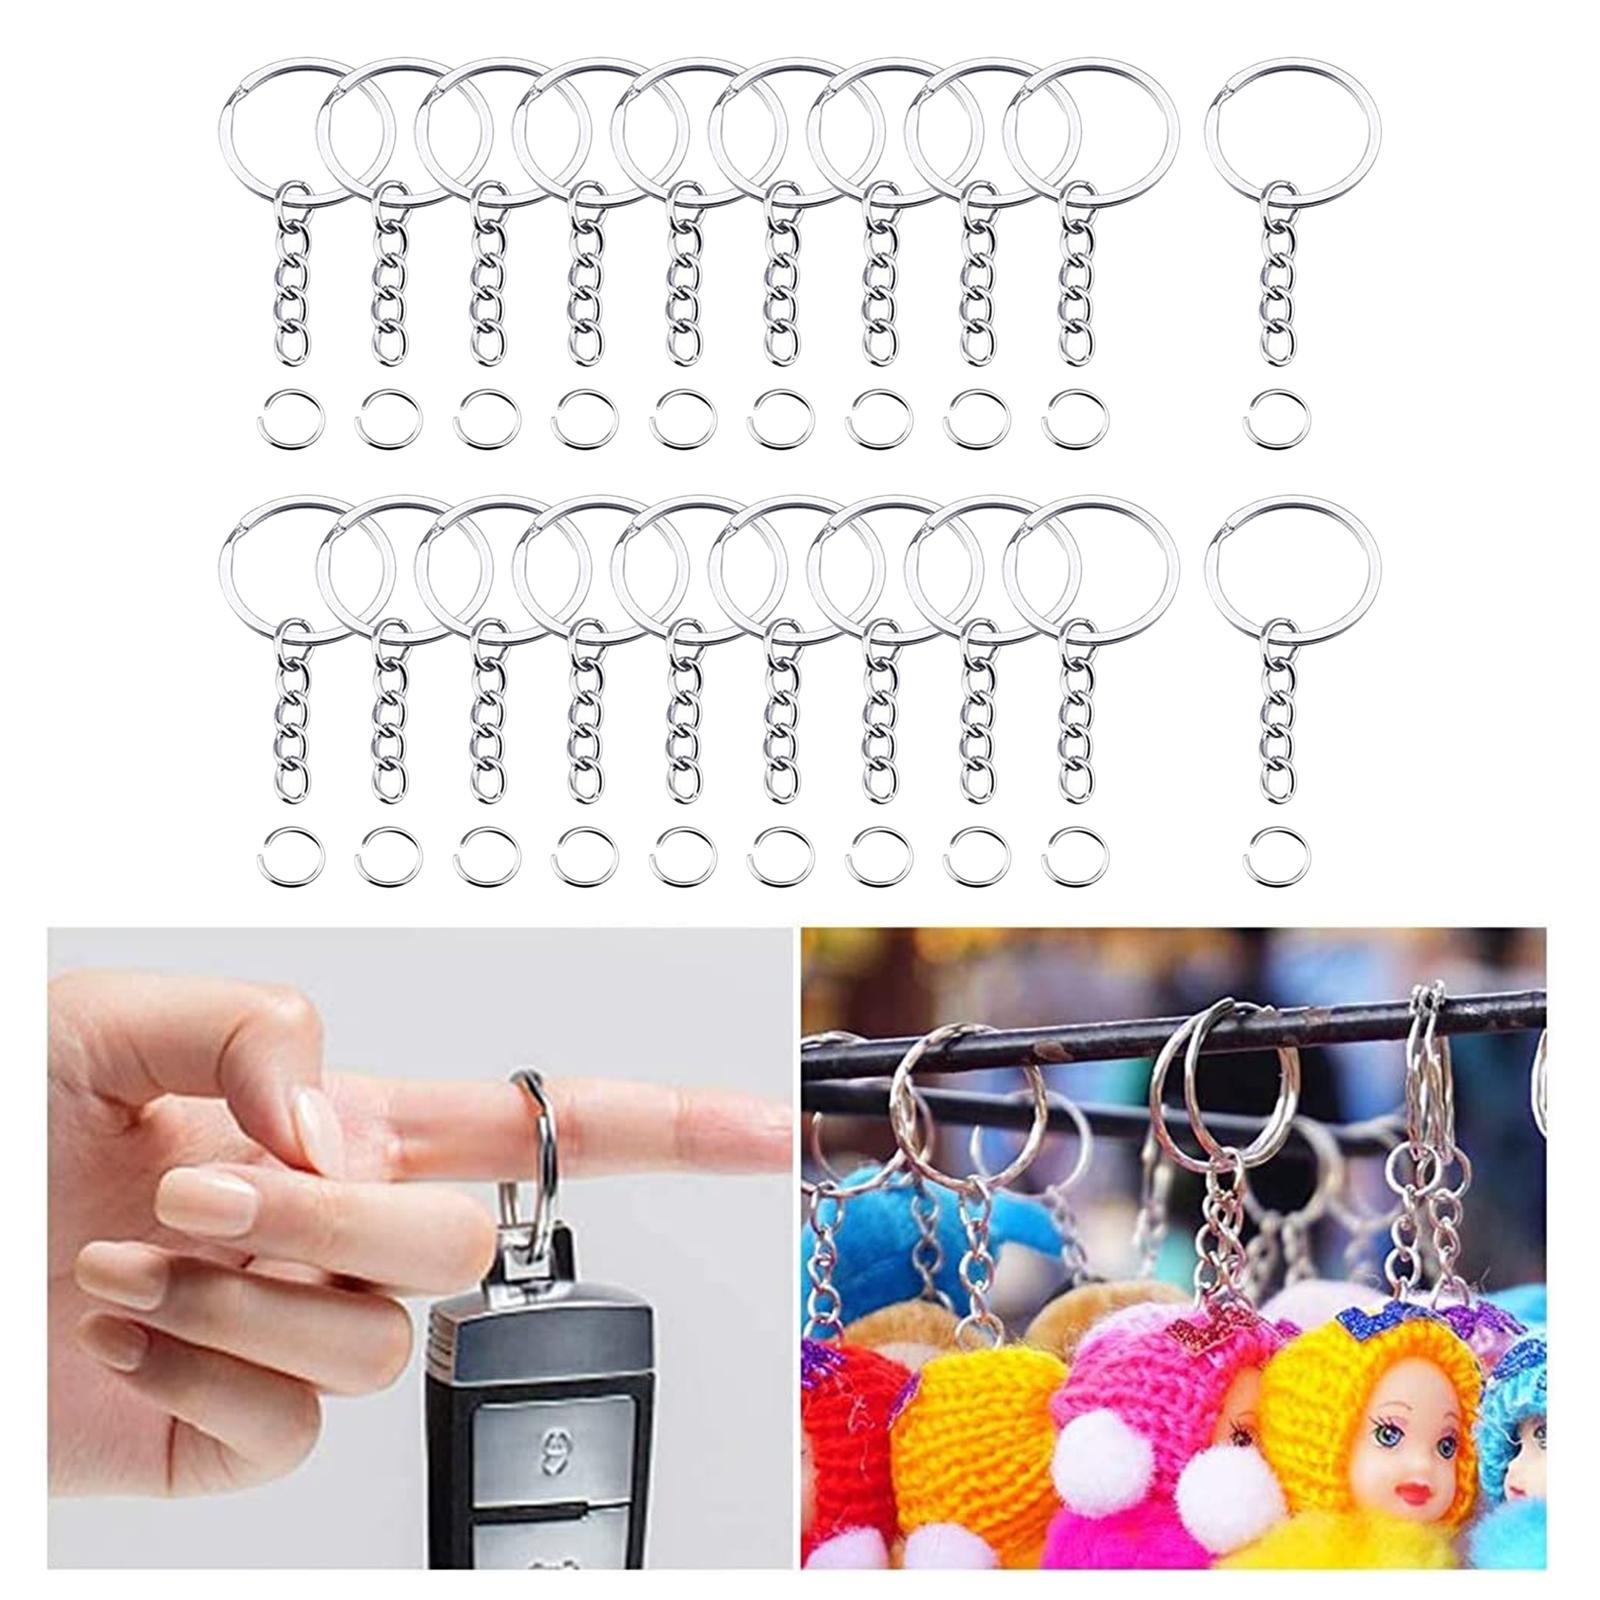 100Pcs Keyring Rings Key Chain Metal Split Key Rings with Chain and Open Jump Rings and for DIY Crafts Jewelry Making, 25 mm Diameter